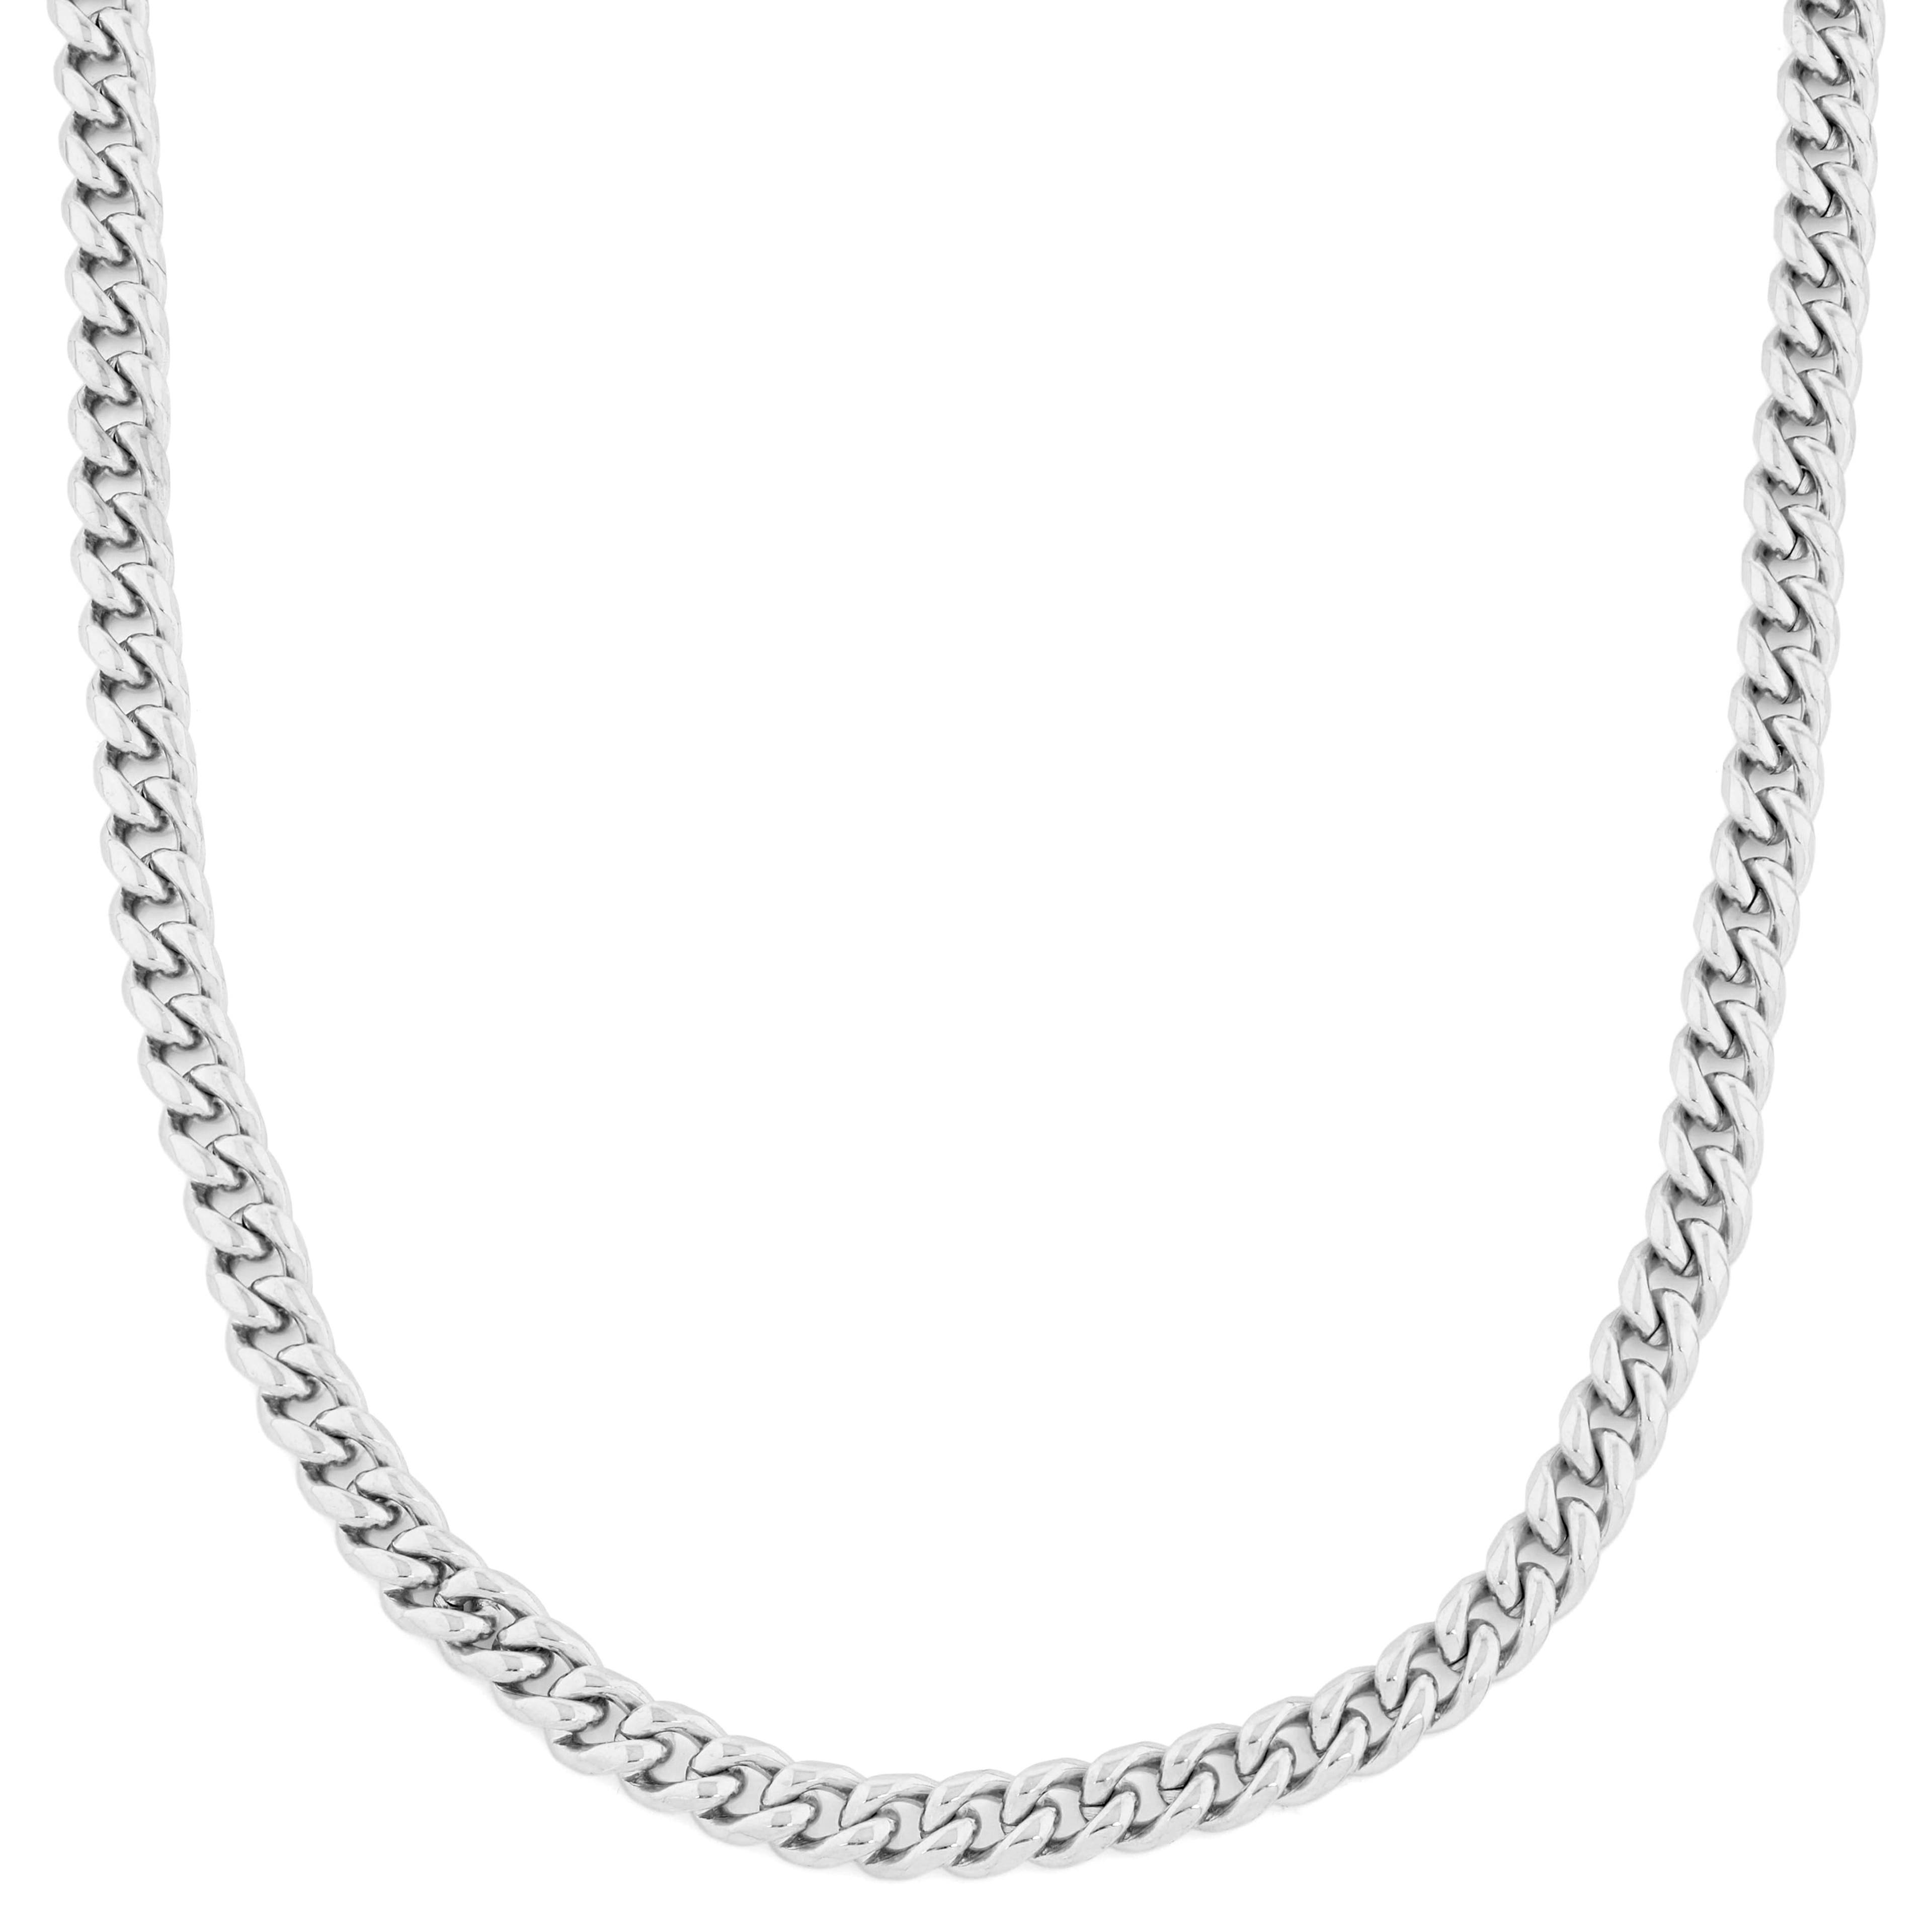 Silver Bag Chain Purse Strap Chain Cable Chains Unisex Chain Necklace,  Men's and Women's Silver Necklace Gift 